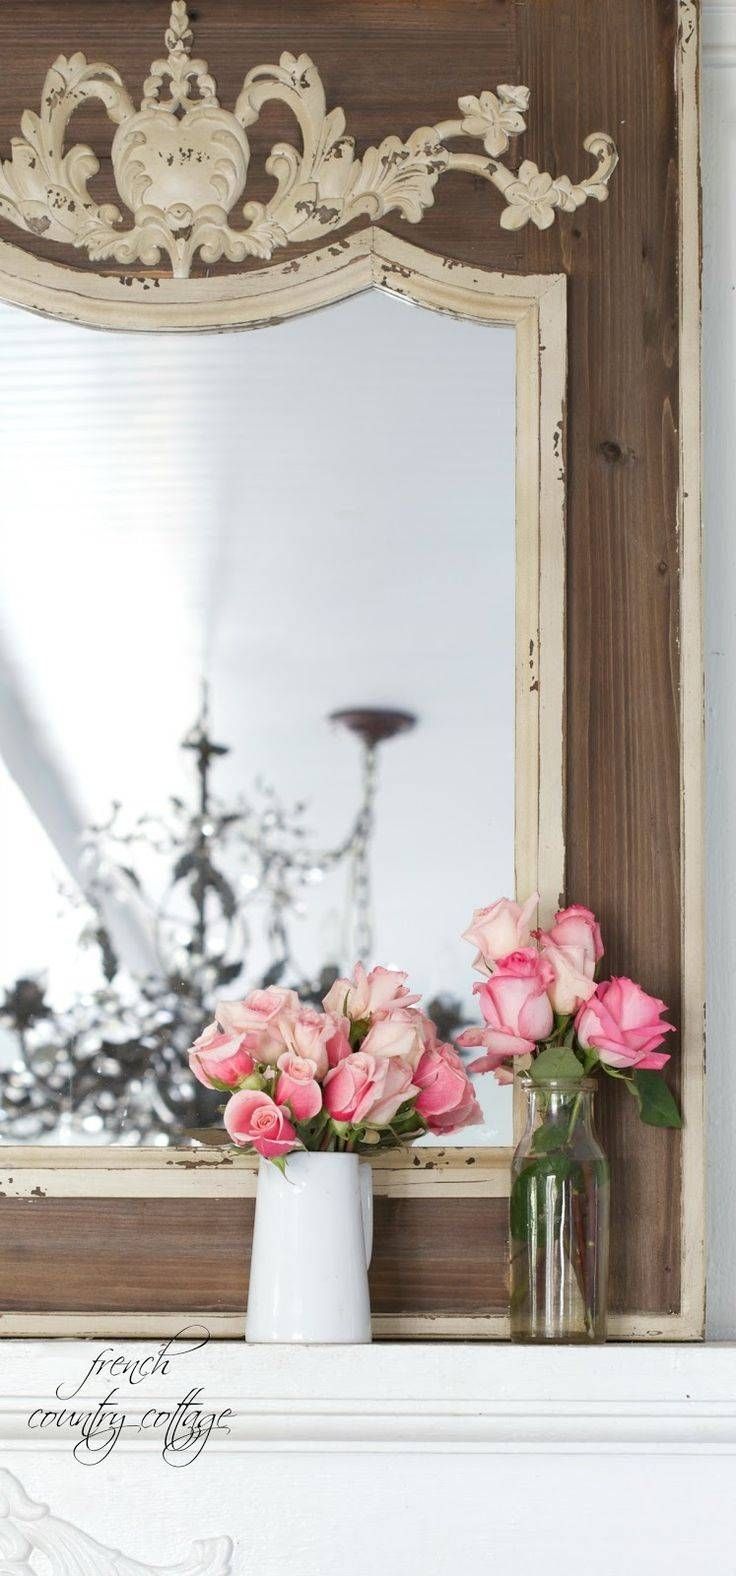 323 Best M I R R O R S Images On Pinterest | Mirror Mirror, Mirror In French Inspired Mirrors (View 7 of 15)